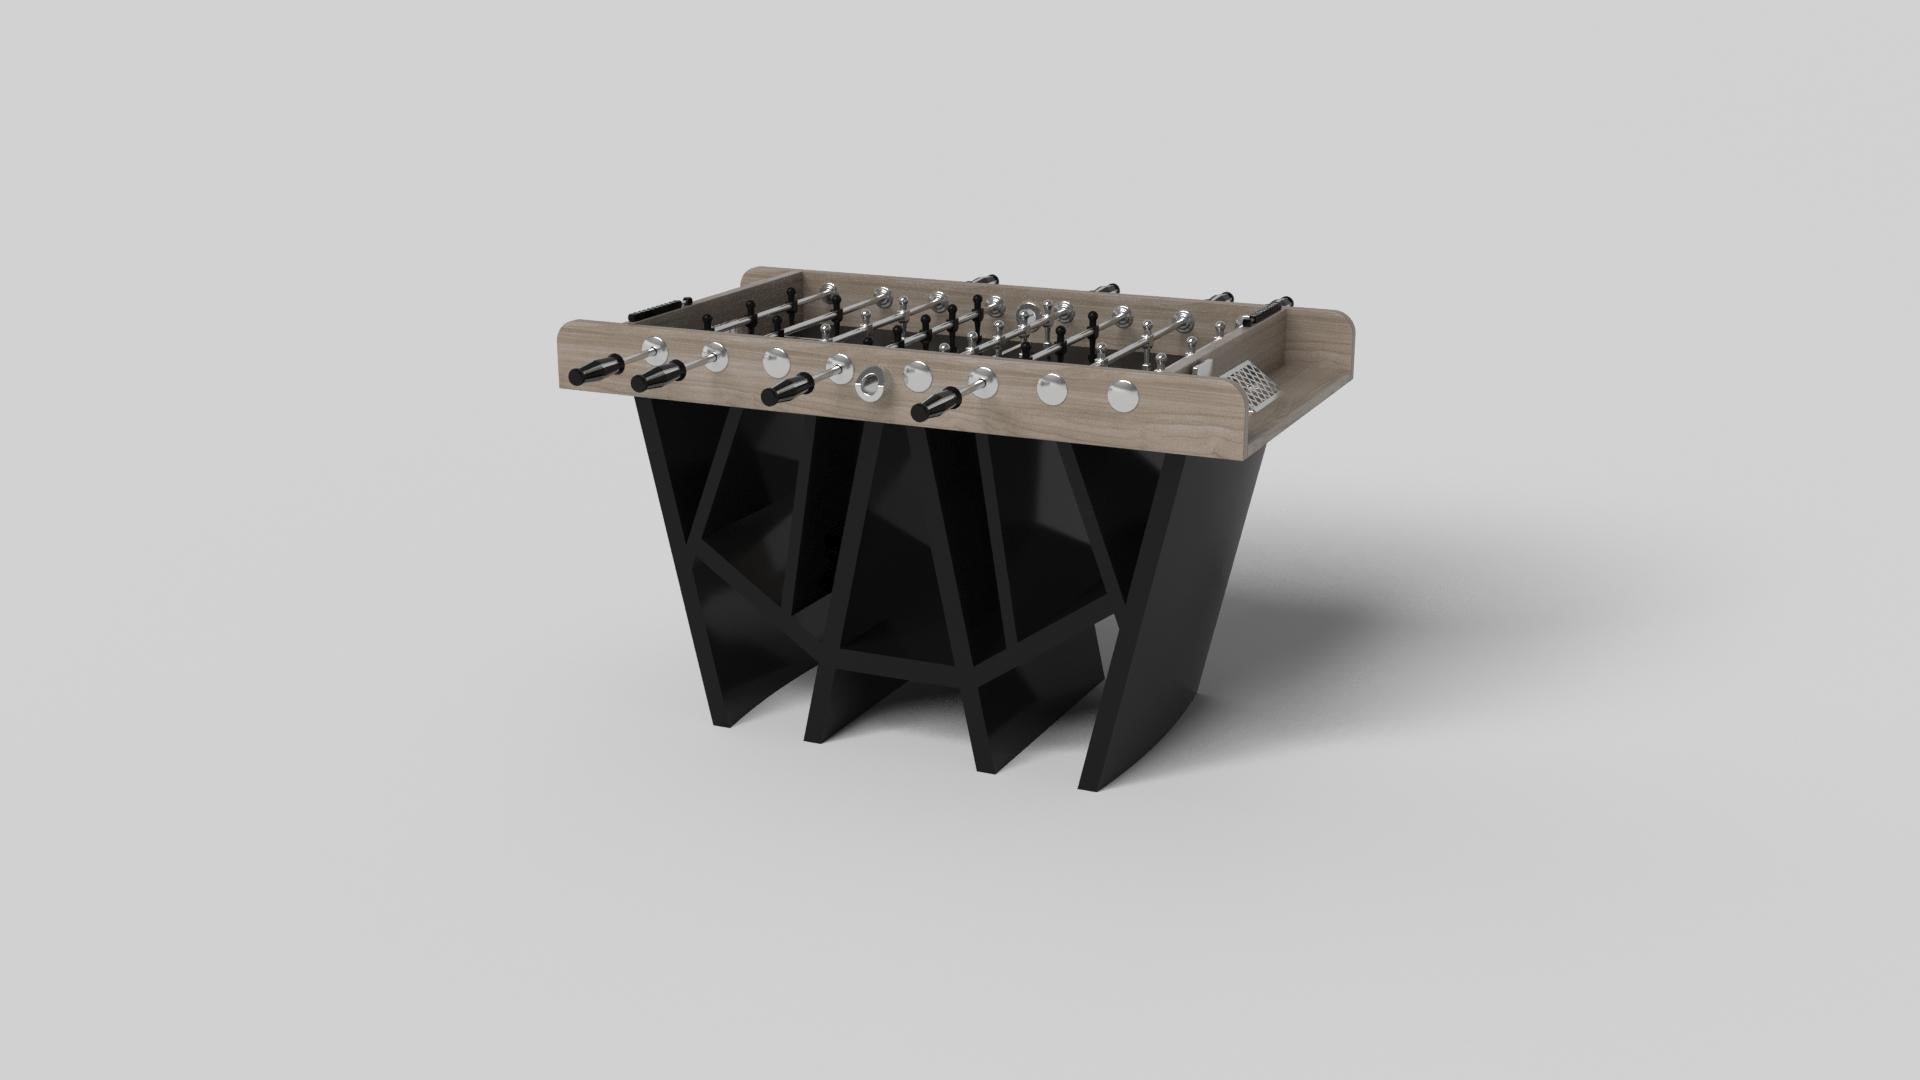 With a combination of acute angles, smooth lines, and geometric configurations, the Maze foosball table in walnut is characterized by a labyrinth-inspired base with a mystifying motif. Beautifully detailed for professional game play, this luxury